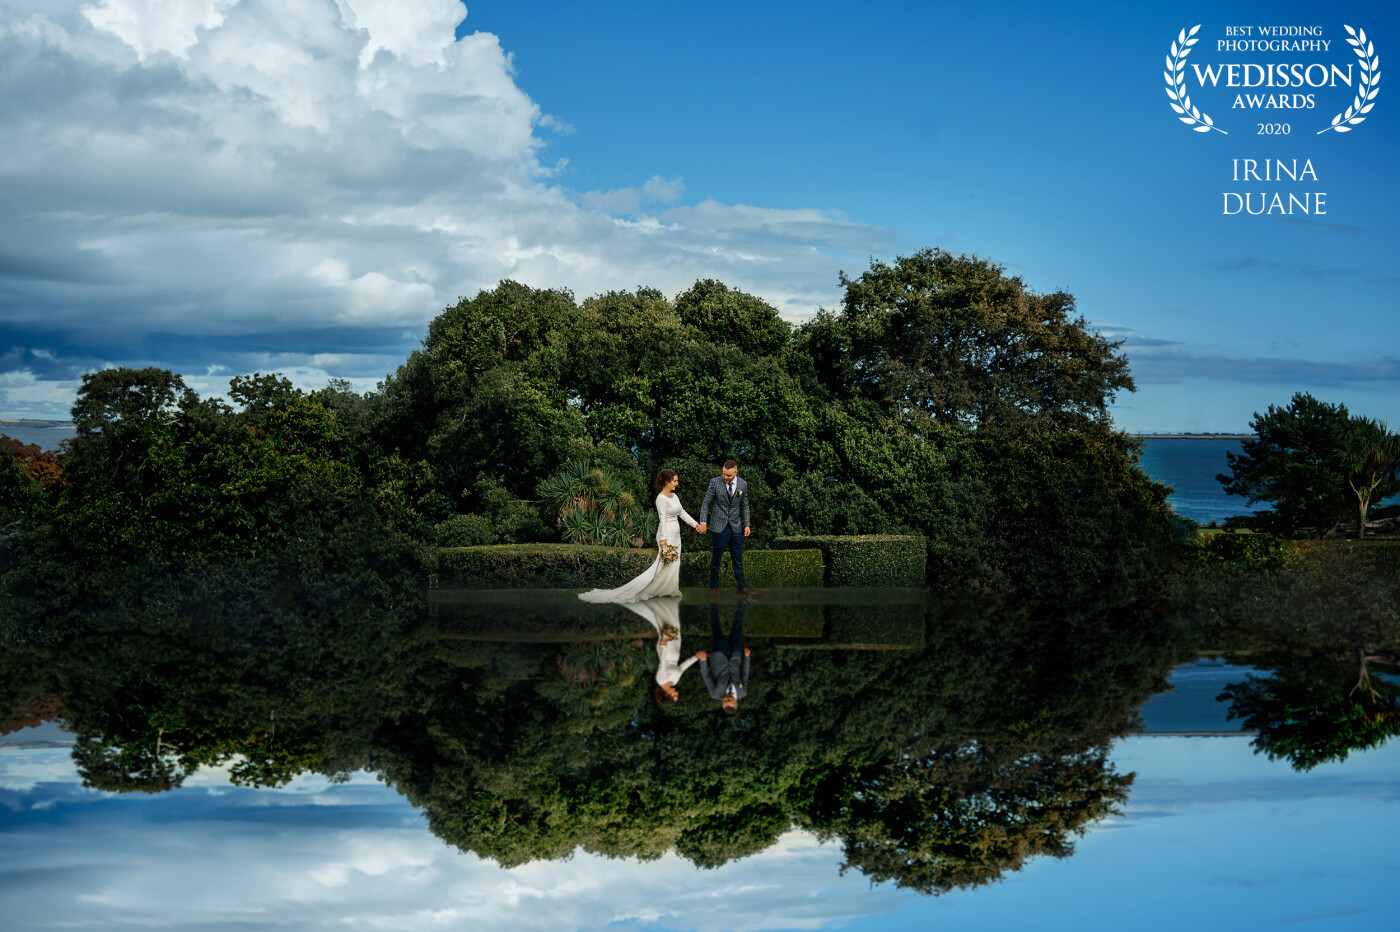 Sunny days in Ireland are a treasure! We took a moment for some shots which showed the beautiful grounds of The Haven Hotel Dunmore East, Co. Waterford where this couple got married. To emphasize the blue skies I used a mirror to give the image a little bit of creative touch. 